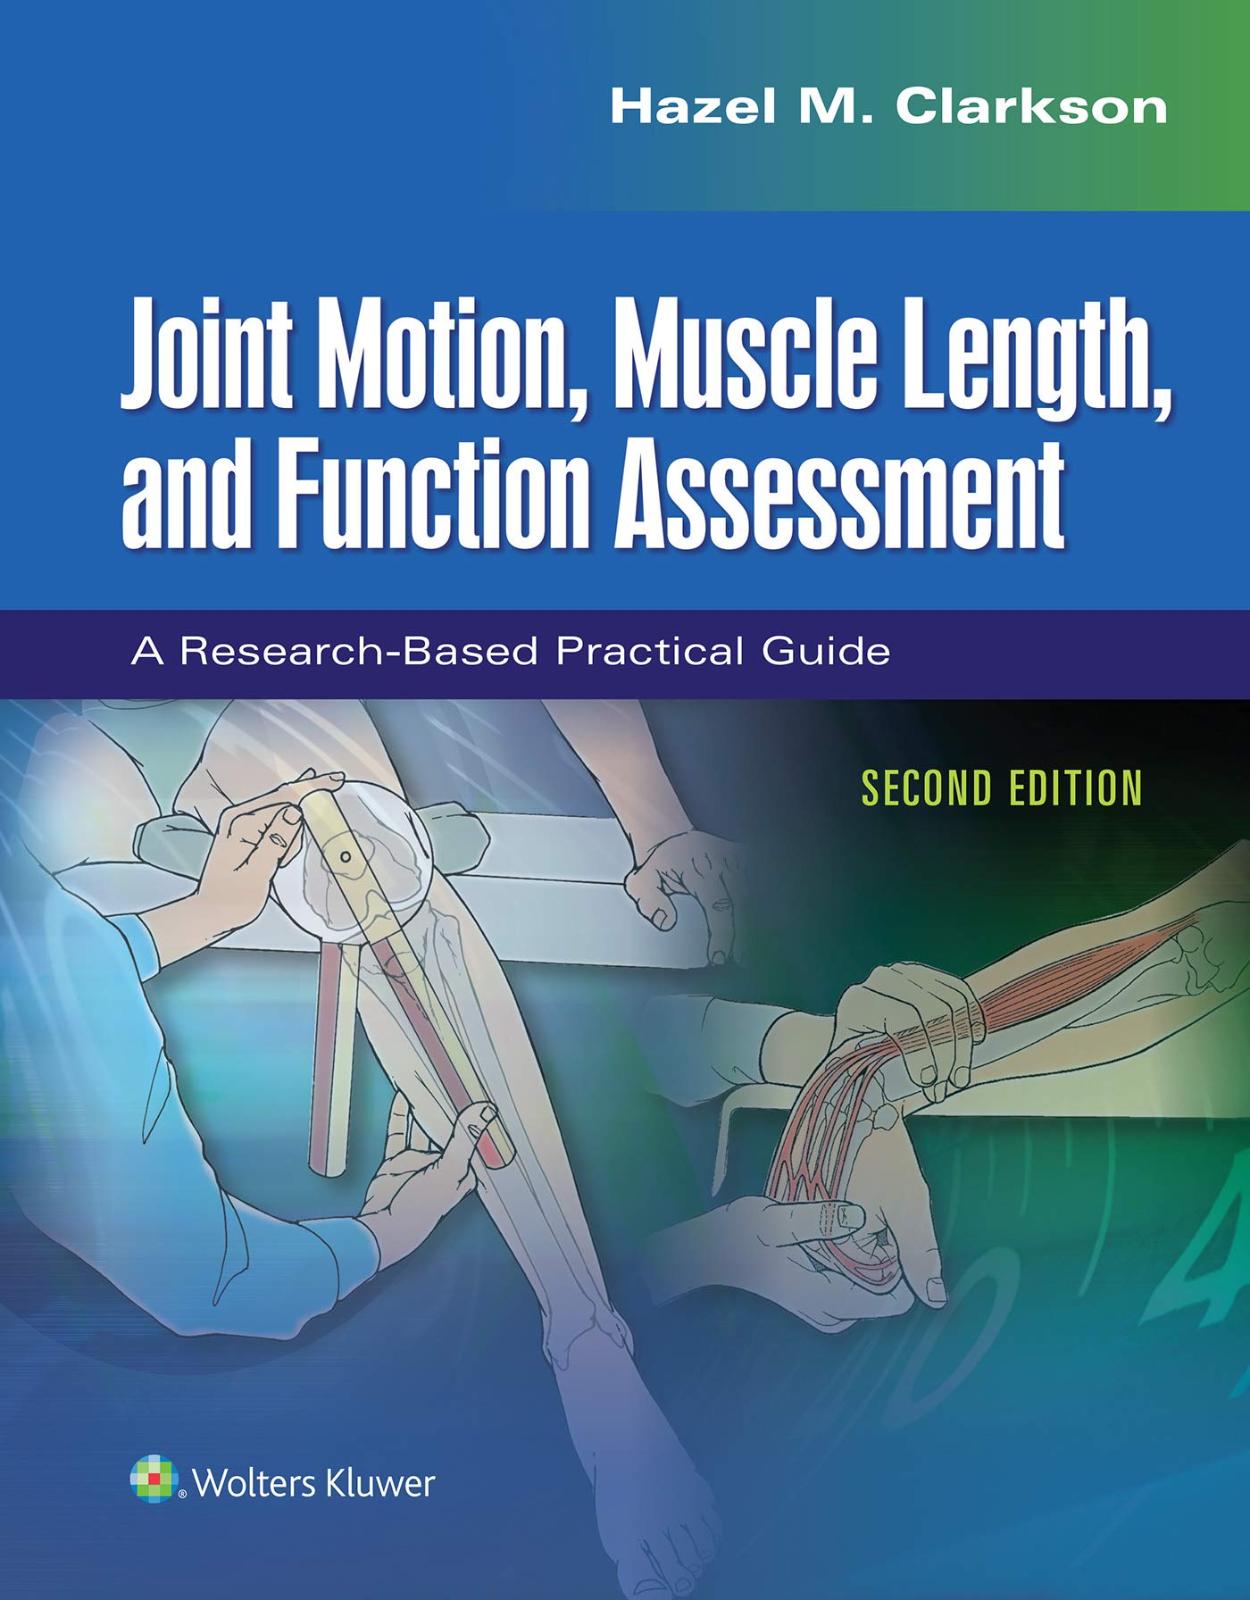 Joint Motion, Muscle Length, and Function Assessment: A Research-Based Practical Guide